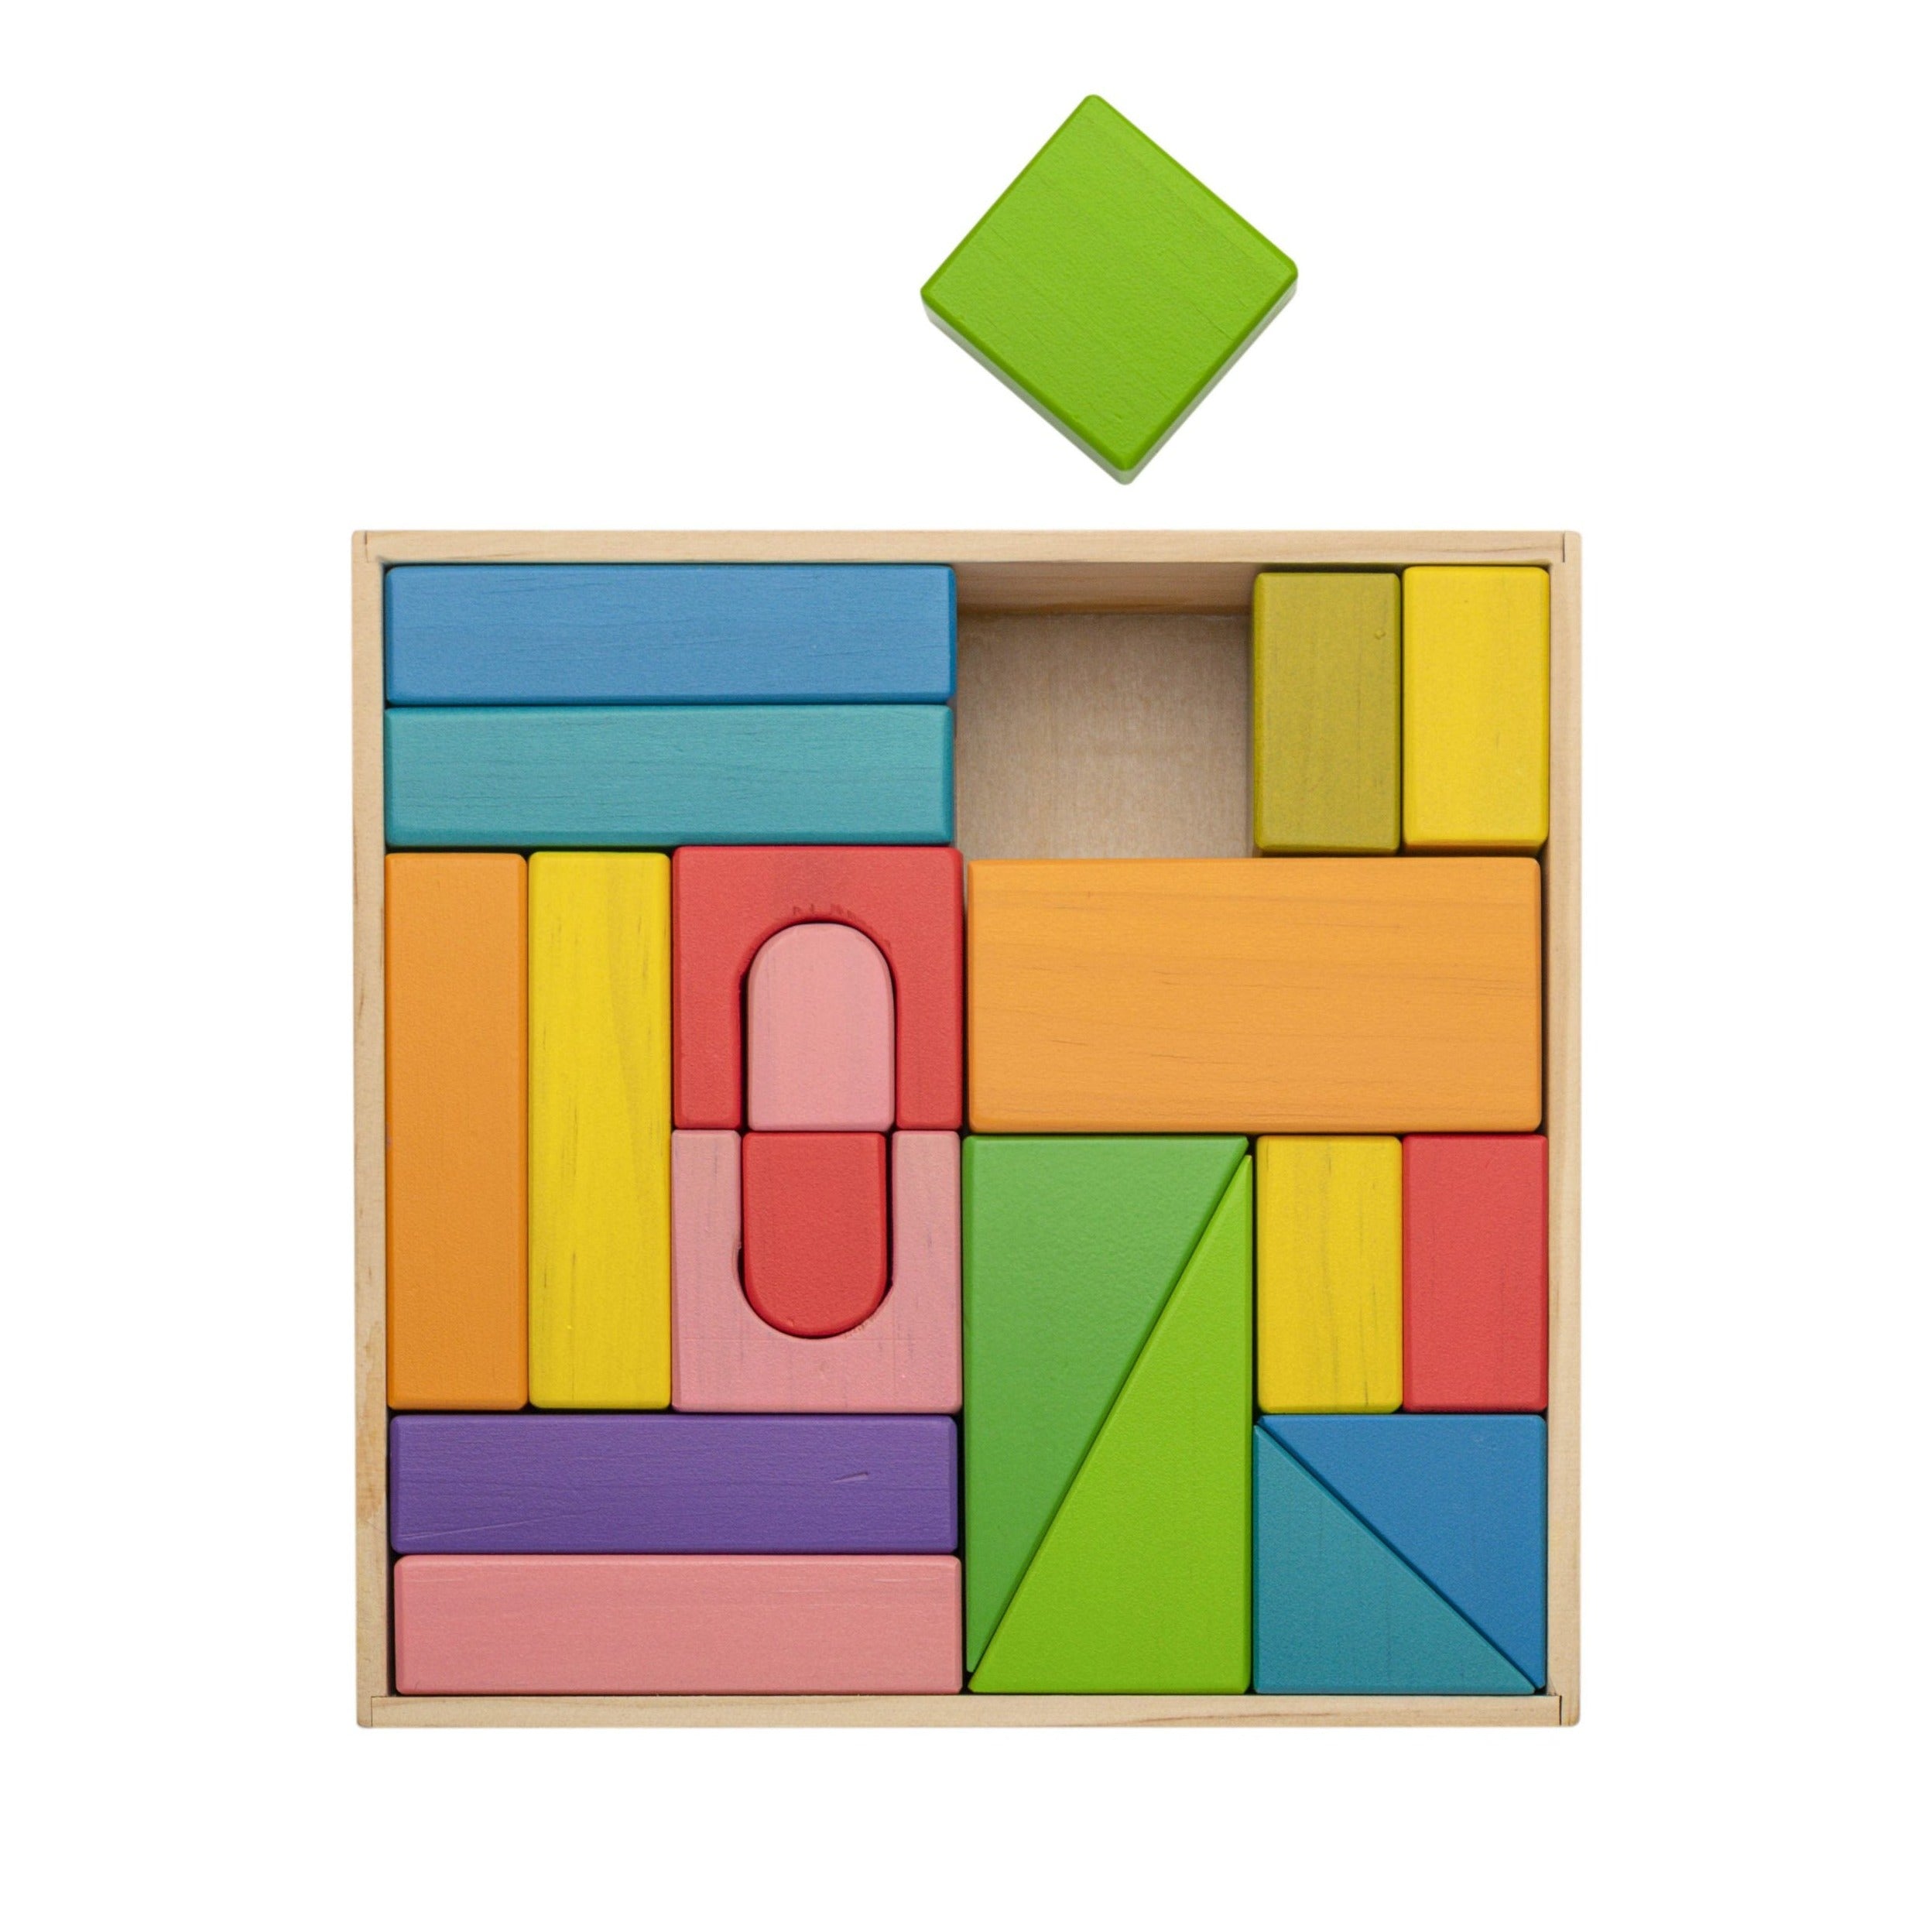 Designer Blocks, Introducing the Wooden Designer Blocks - the perfect building blocks for budding builders! With their beautiful, bright, and sturdy design, these blocks will inspire creativity and create exciting structures.The blocks come in a variety of eye-catching colors, including pink, green, blue, yellow, orange, and more. Each set includes a range of shapes, such as squares, arches, and rods, allowing children to explore and discover new building possibilities.Not only are these blocks fun to play 